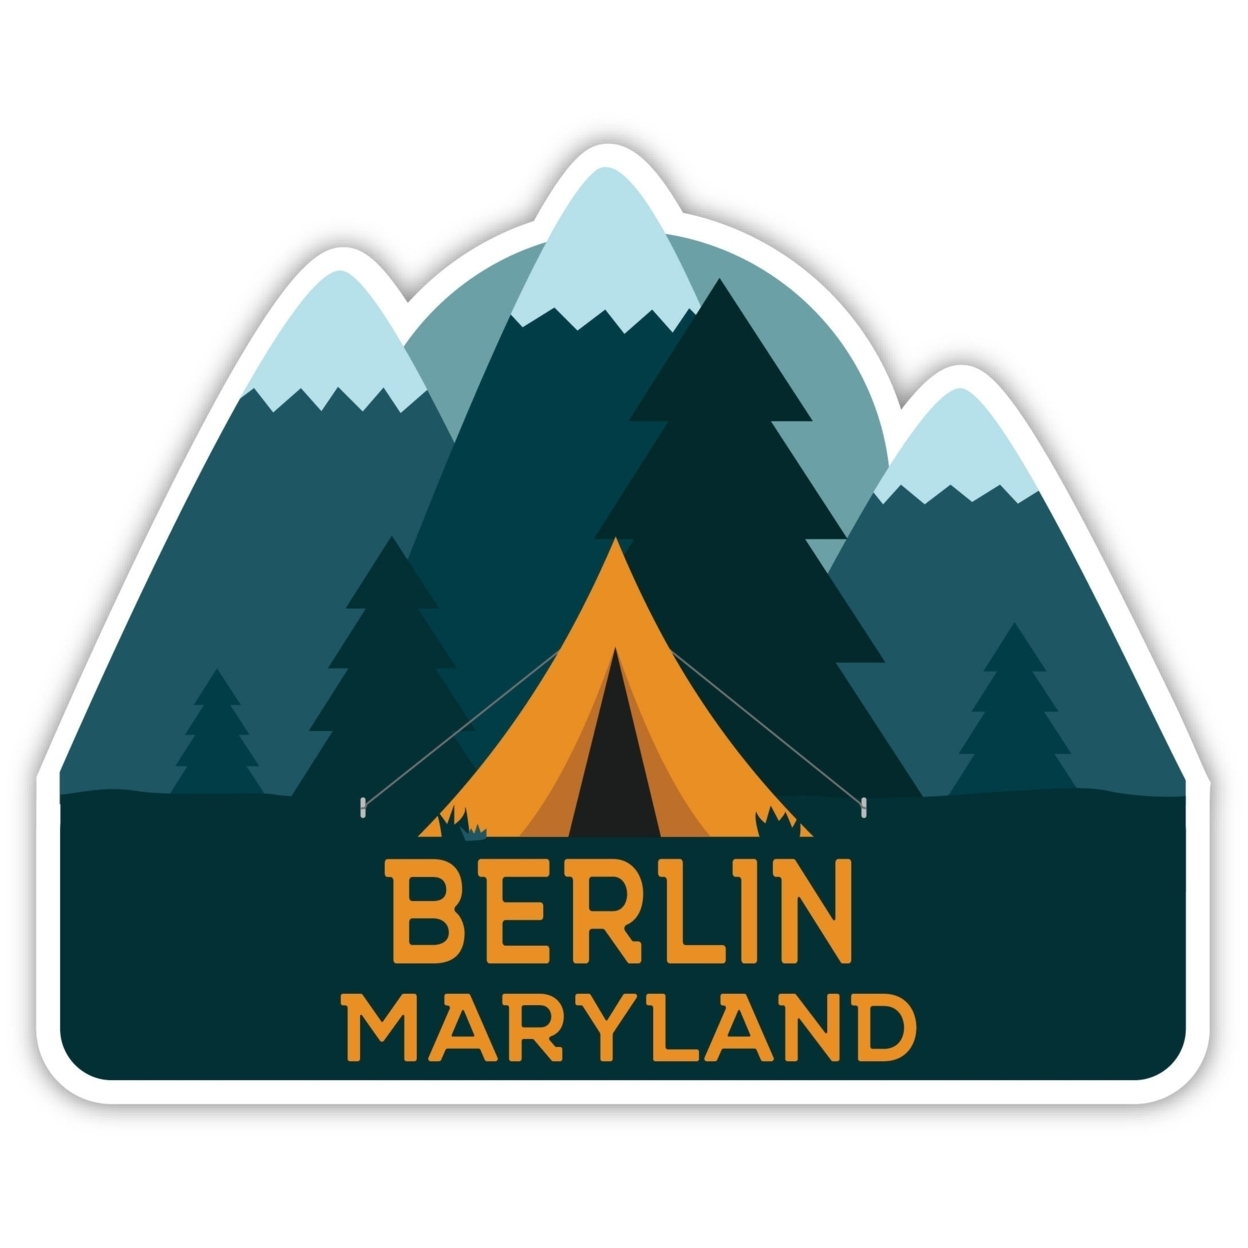 Berlin Maryland Souvenir Decorative Stickers (Choose Theme And Size) - 4-Pack, 6-Inch, Tent